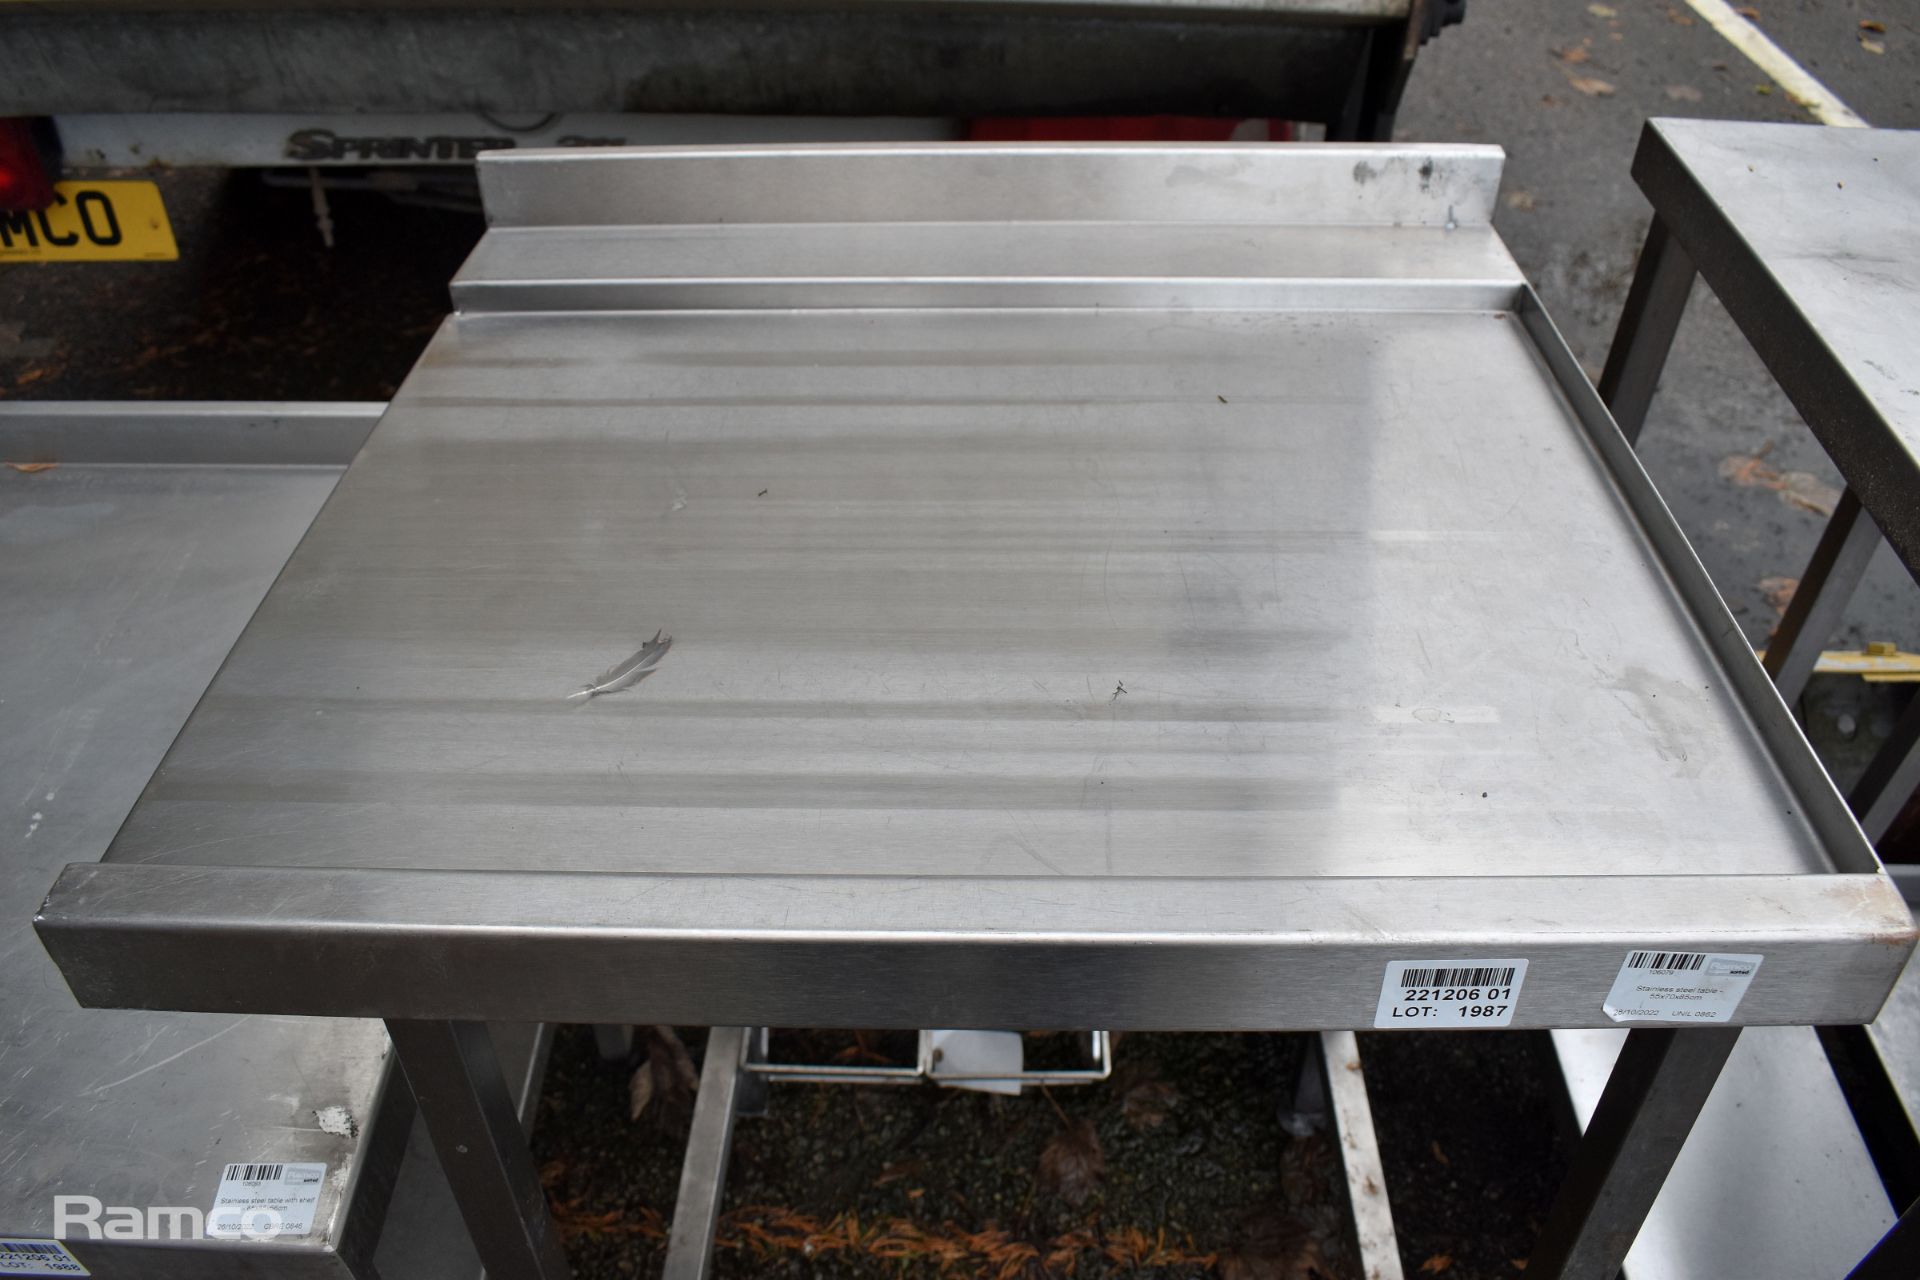 Stainless steel table - 55 x 70 x 85cm - Image 2 of 2